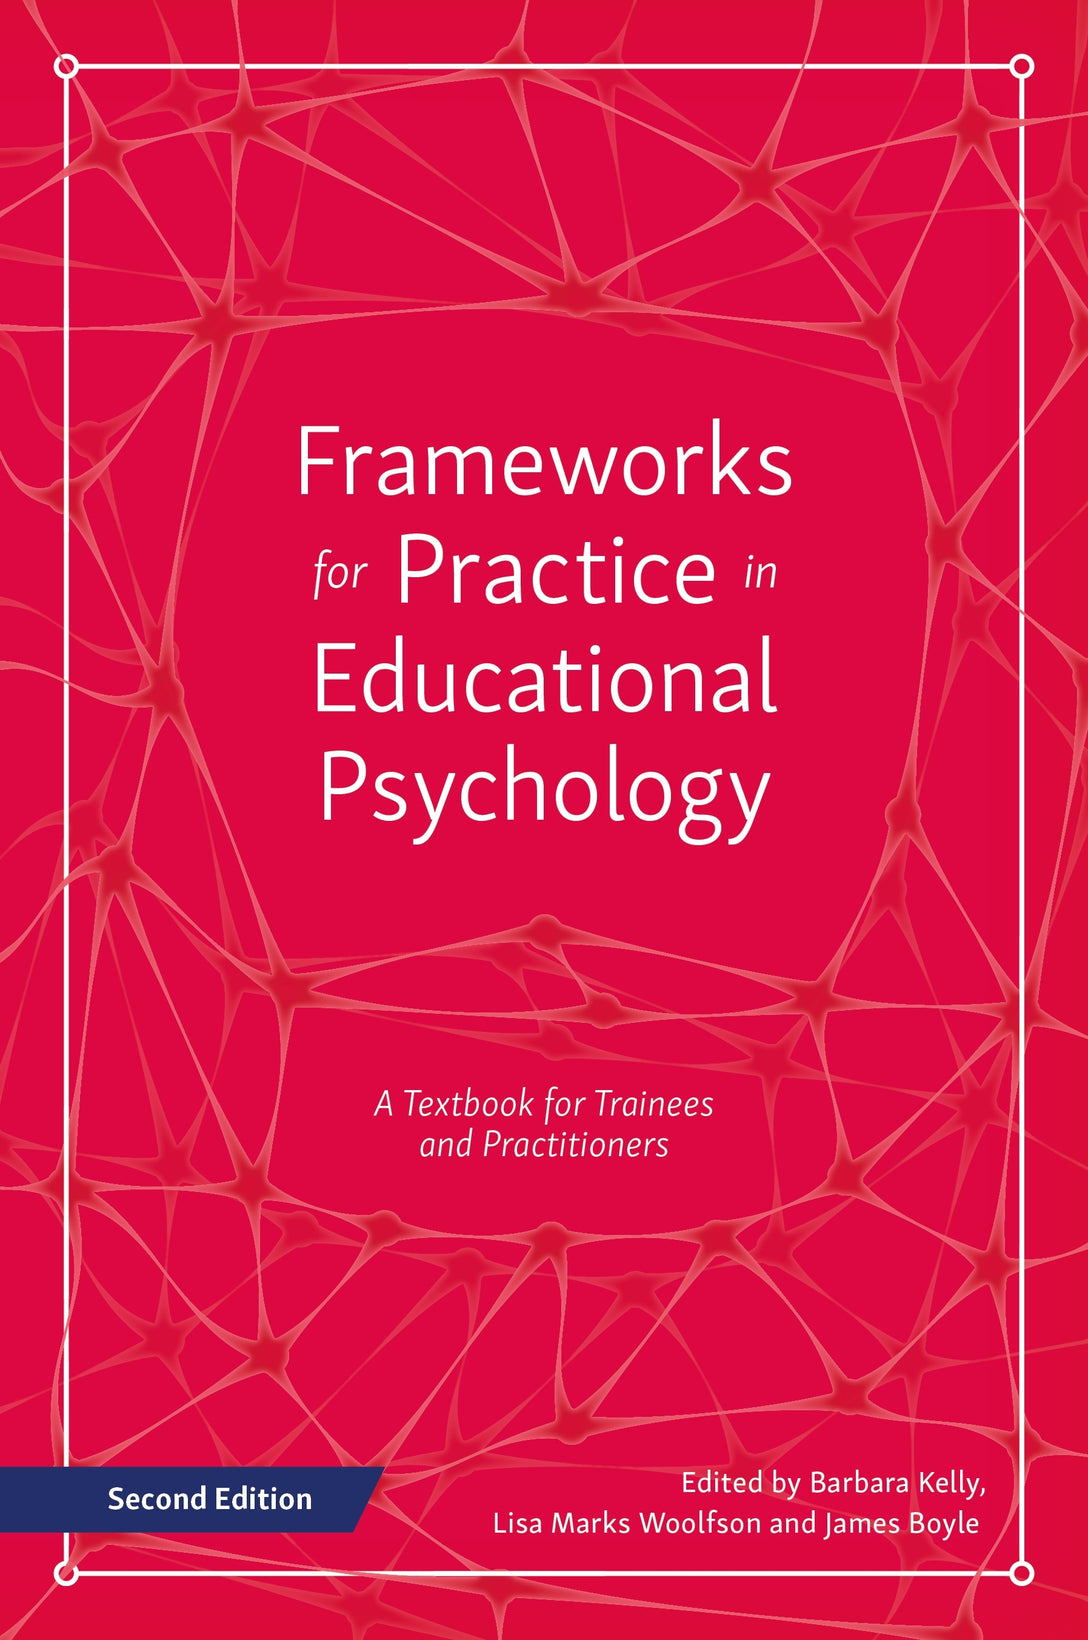 Frameworks for Practice in Educational Psychology, Second Edition by Barbara Kelly, Lisa Marks Woolfson, James Boyle, No Author Listed